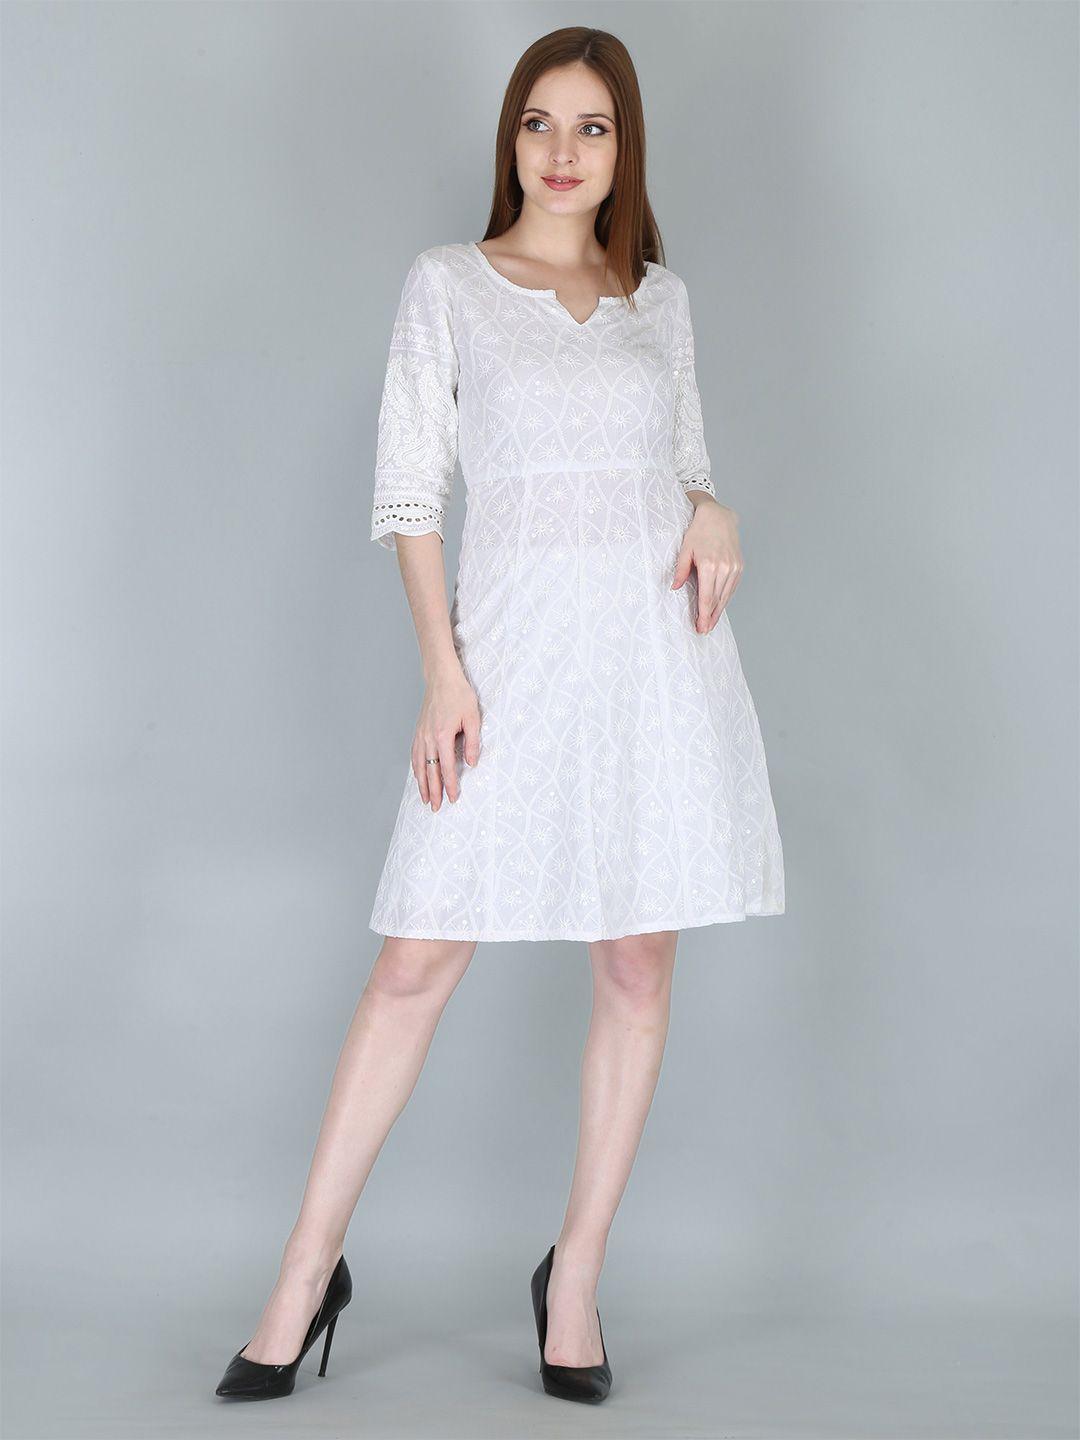 kalini white floral embroidered ethnic dress